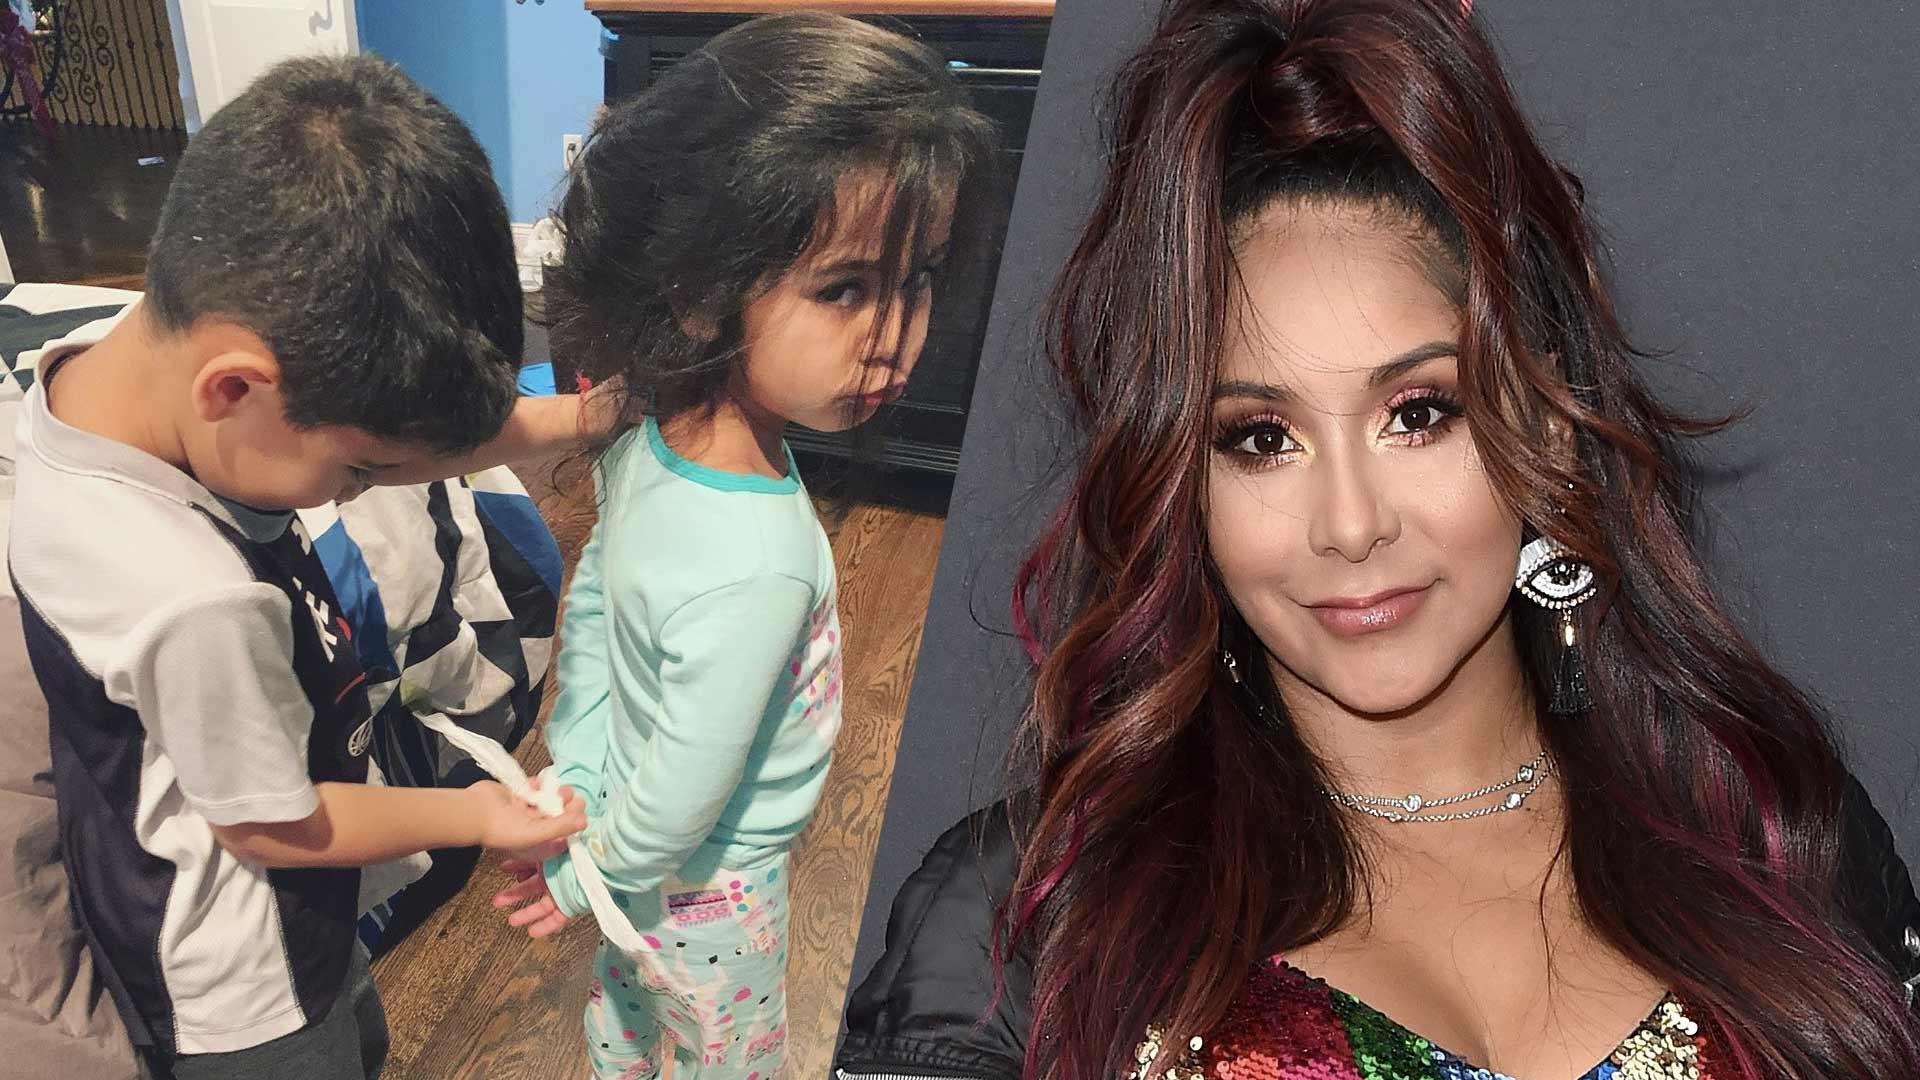 Snooki Shares Hilarious Pic Of Her Daughter Getting Fake Arrested: ‘SHES A GOOD PERSON!’